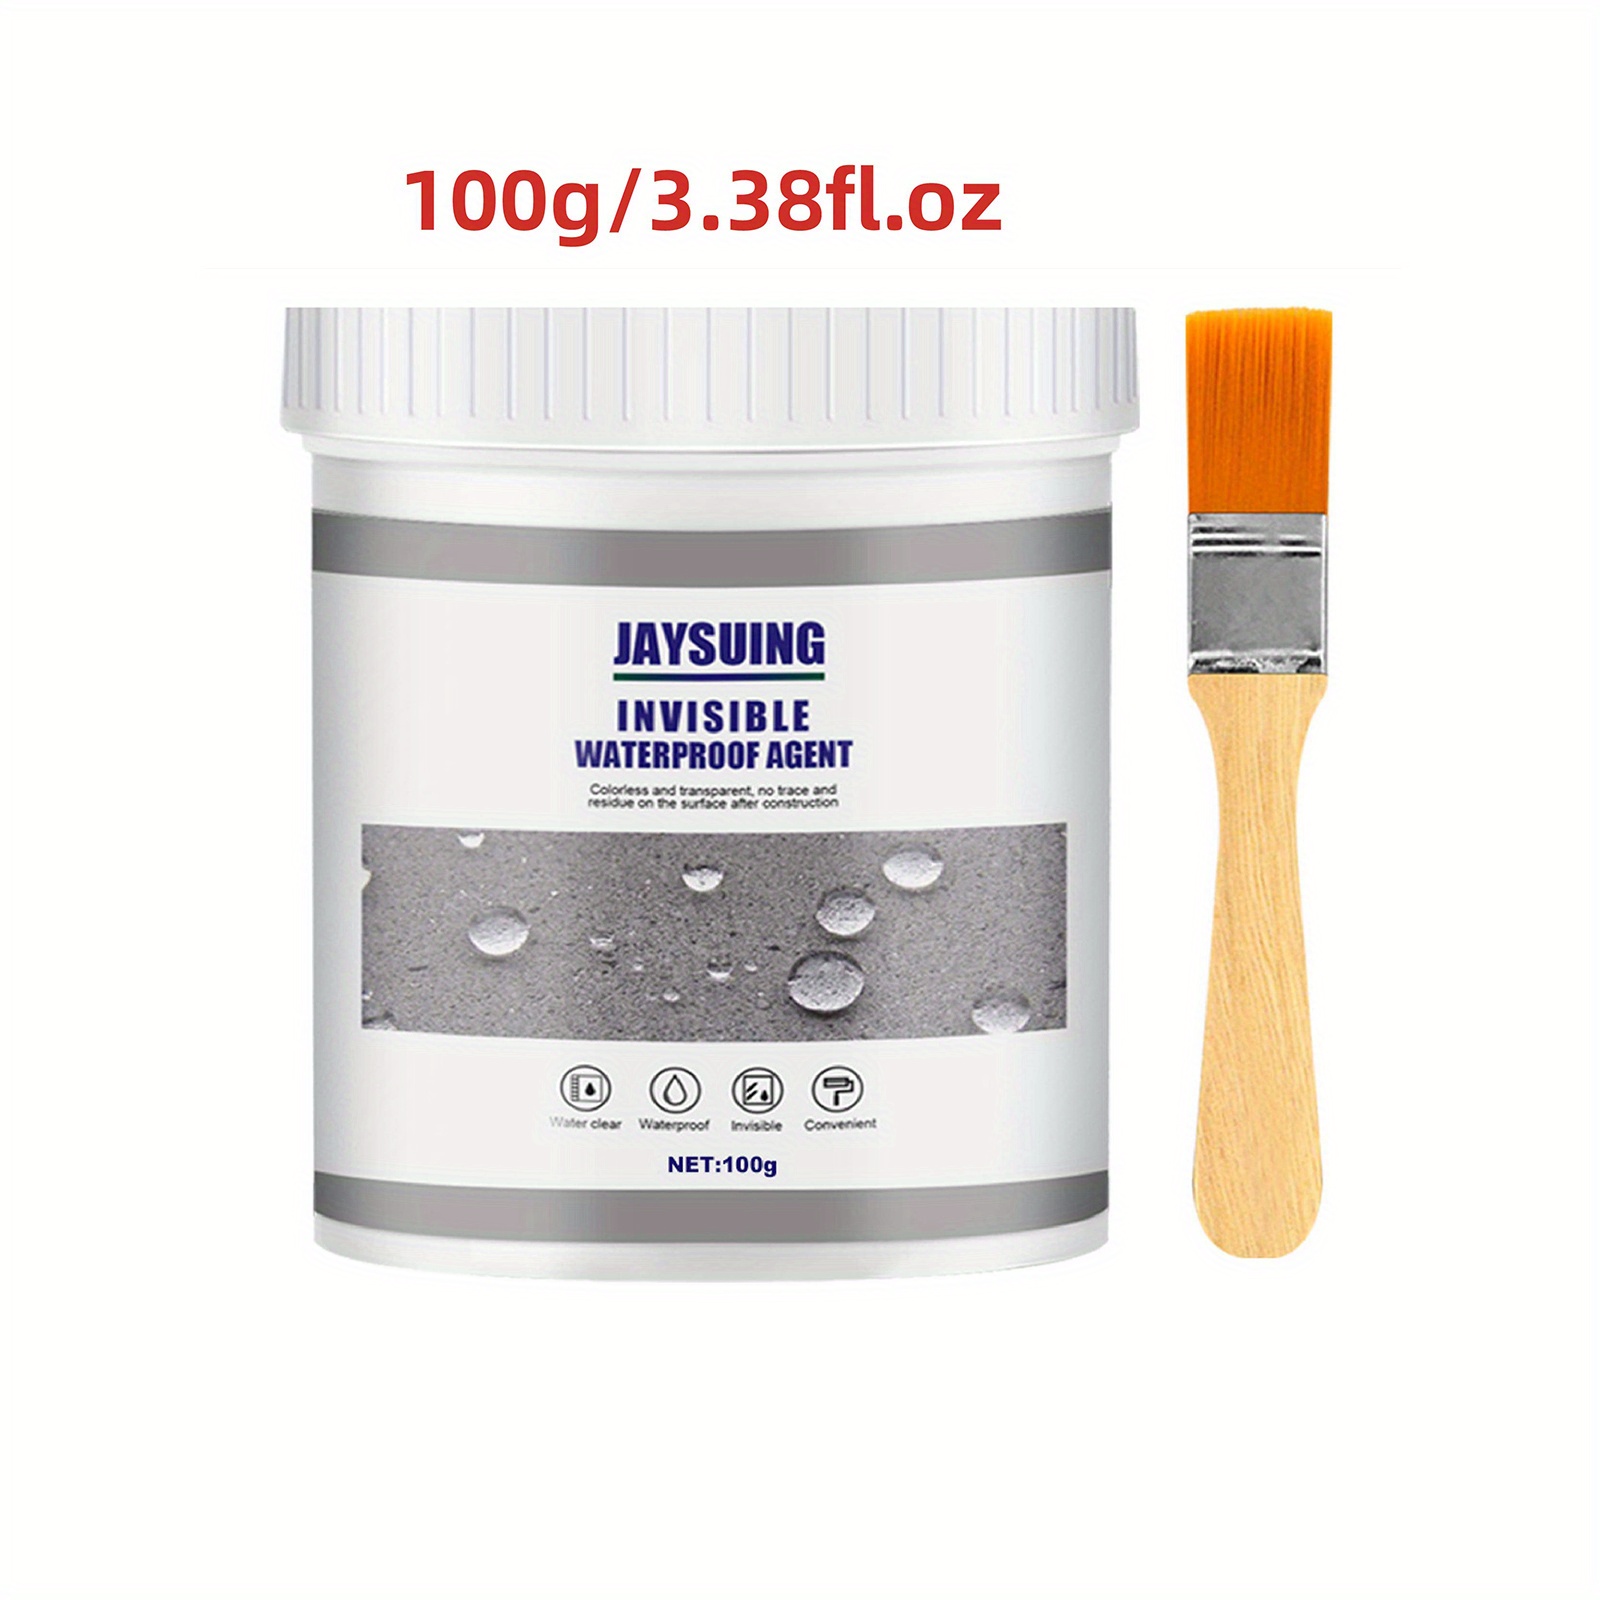 300g Invisible Waterproof Agent Insulating Sealant Anti-Leakage